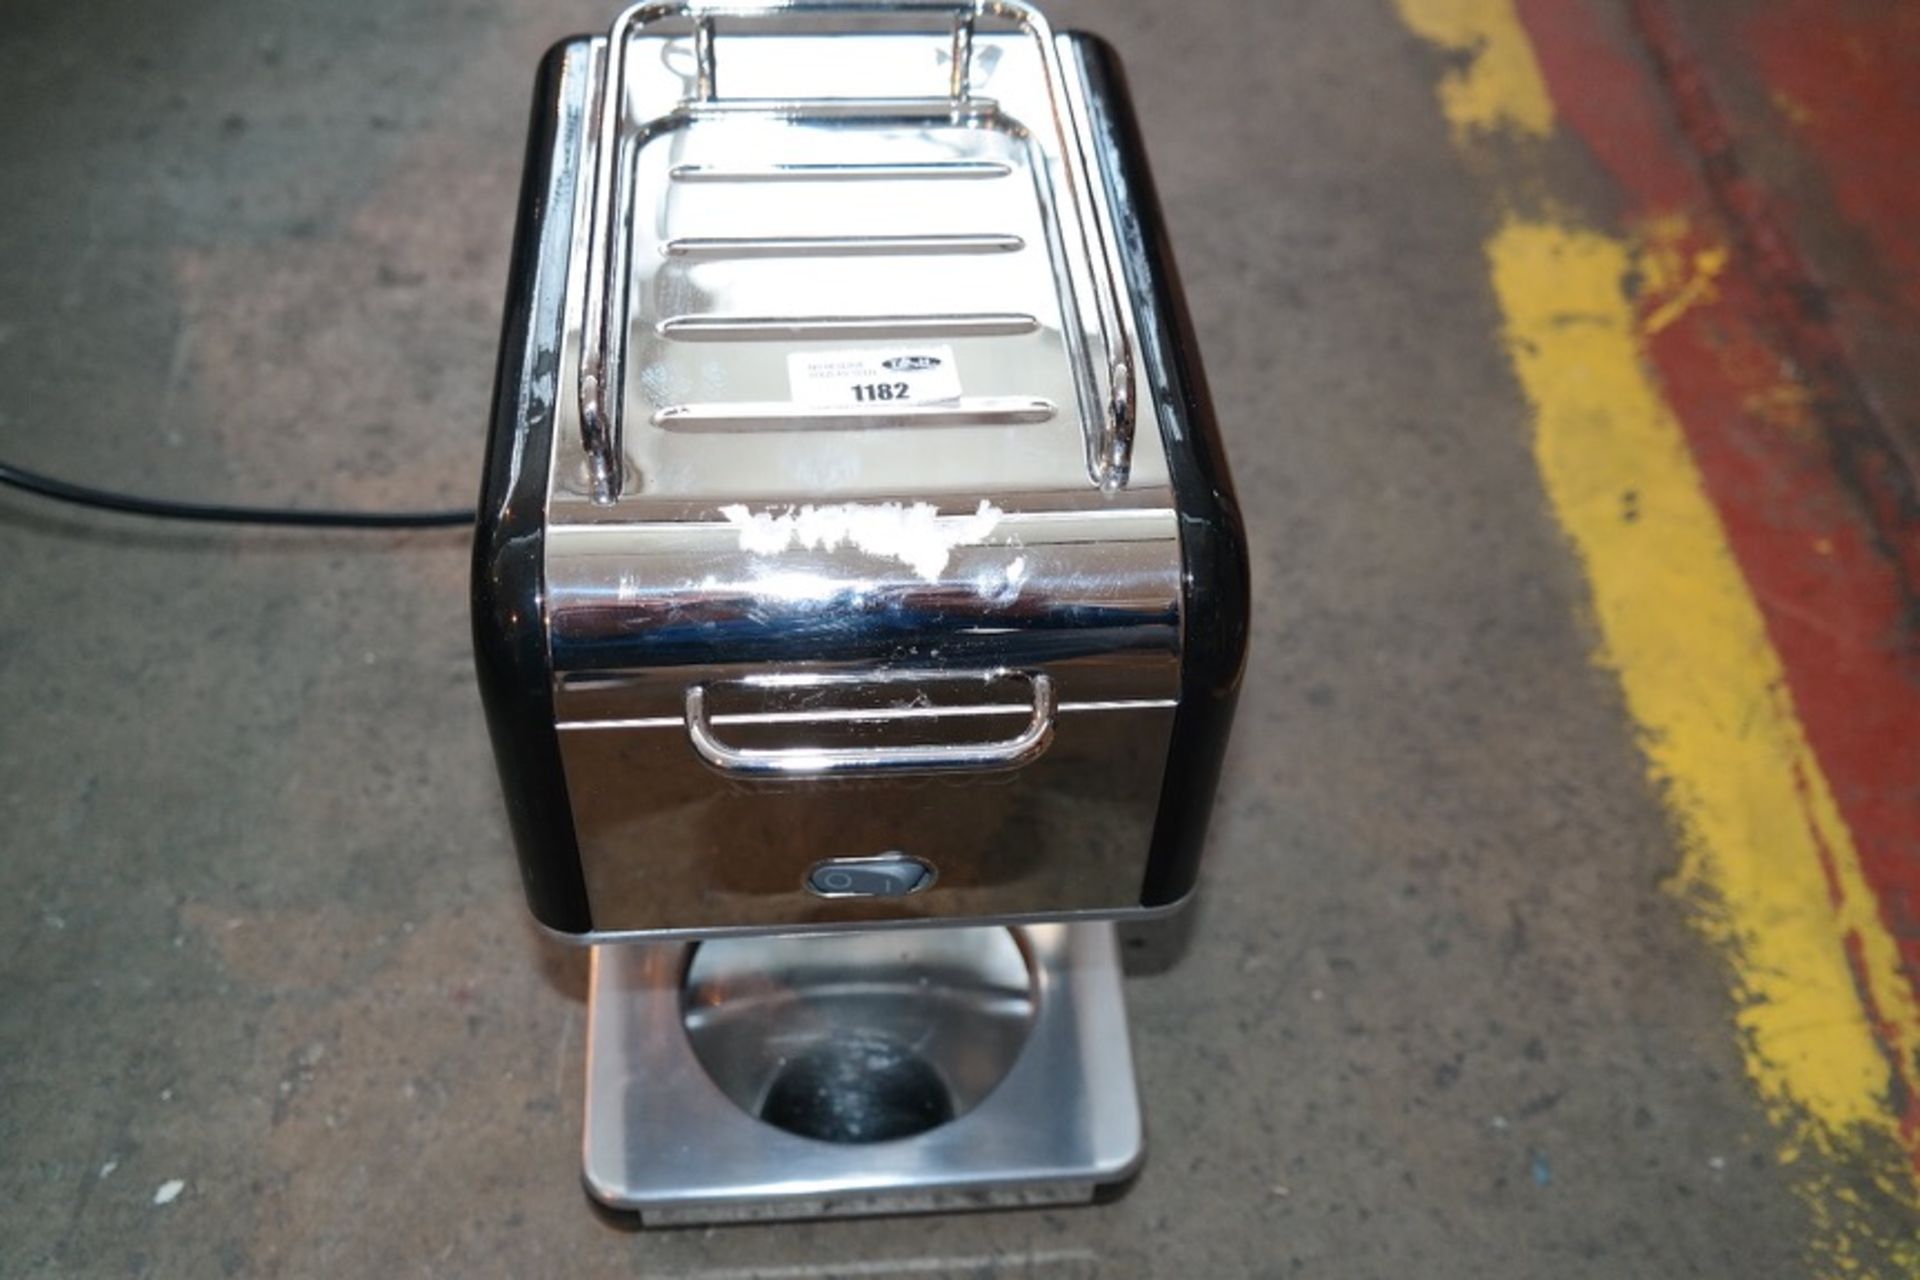 1 x KENWOOD KMIX COFFEE MACHINE   *PLEASE NOTE THAT THE BID PRICE IS MULTIPLIED BY THE NUMBER OF